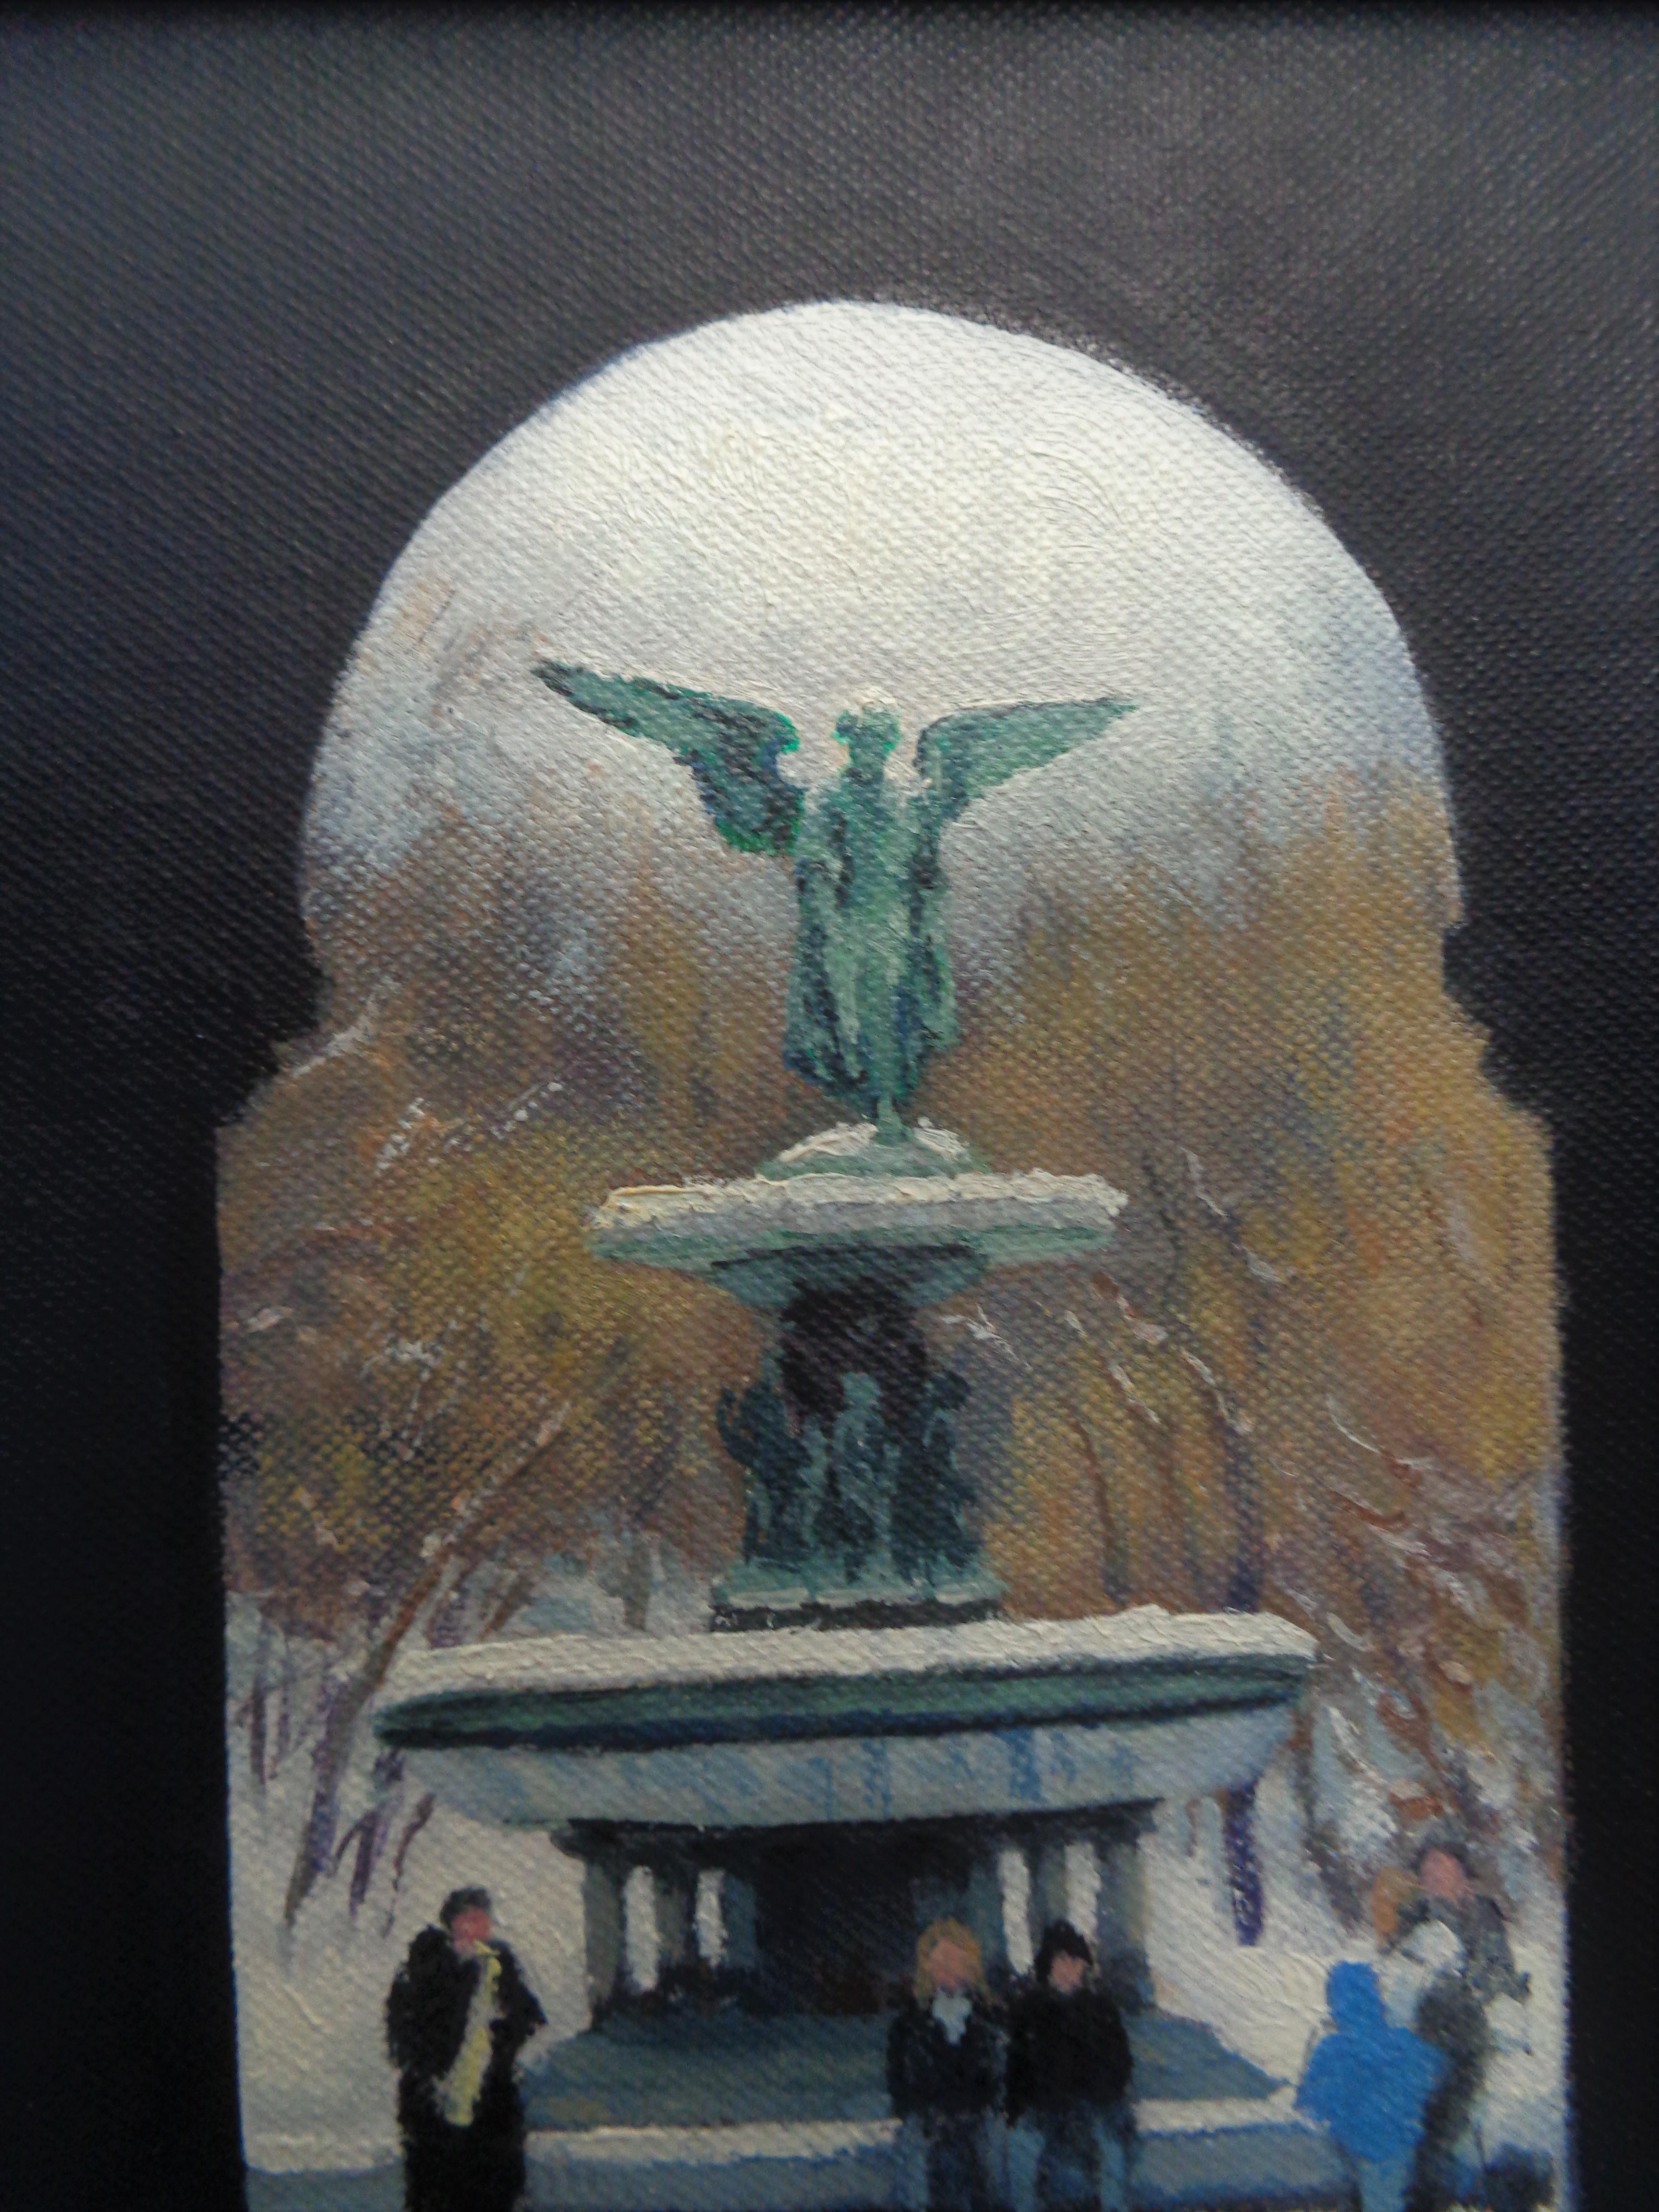  New York City Painting Michael Budden Bethesda Fountain Angel of the Waters 1